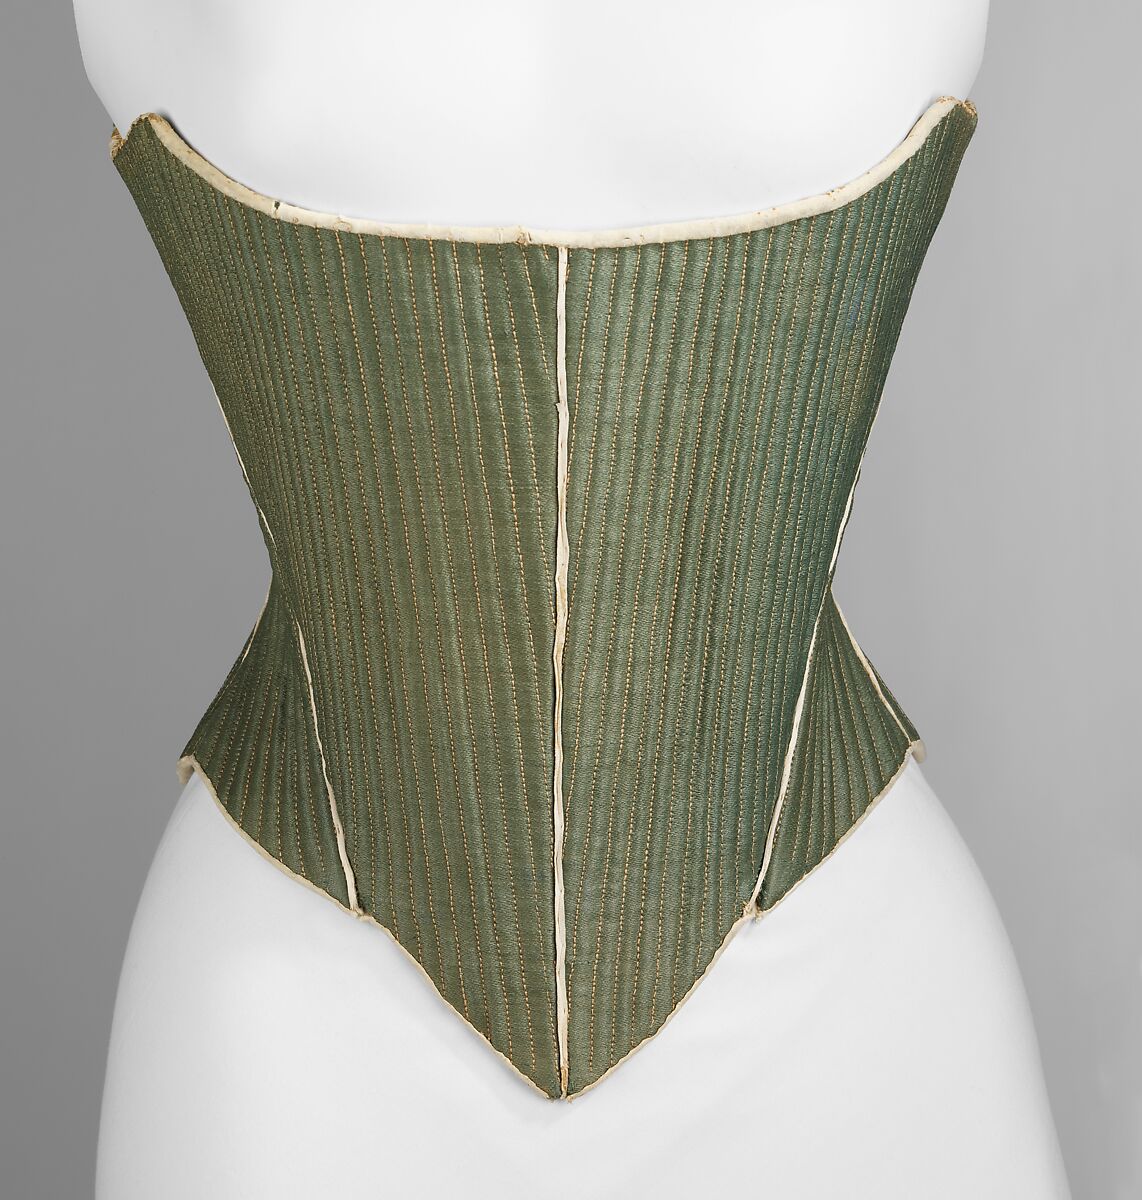 Corset, wool, leather, linen, reeds, American 